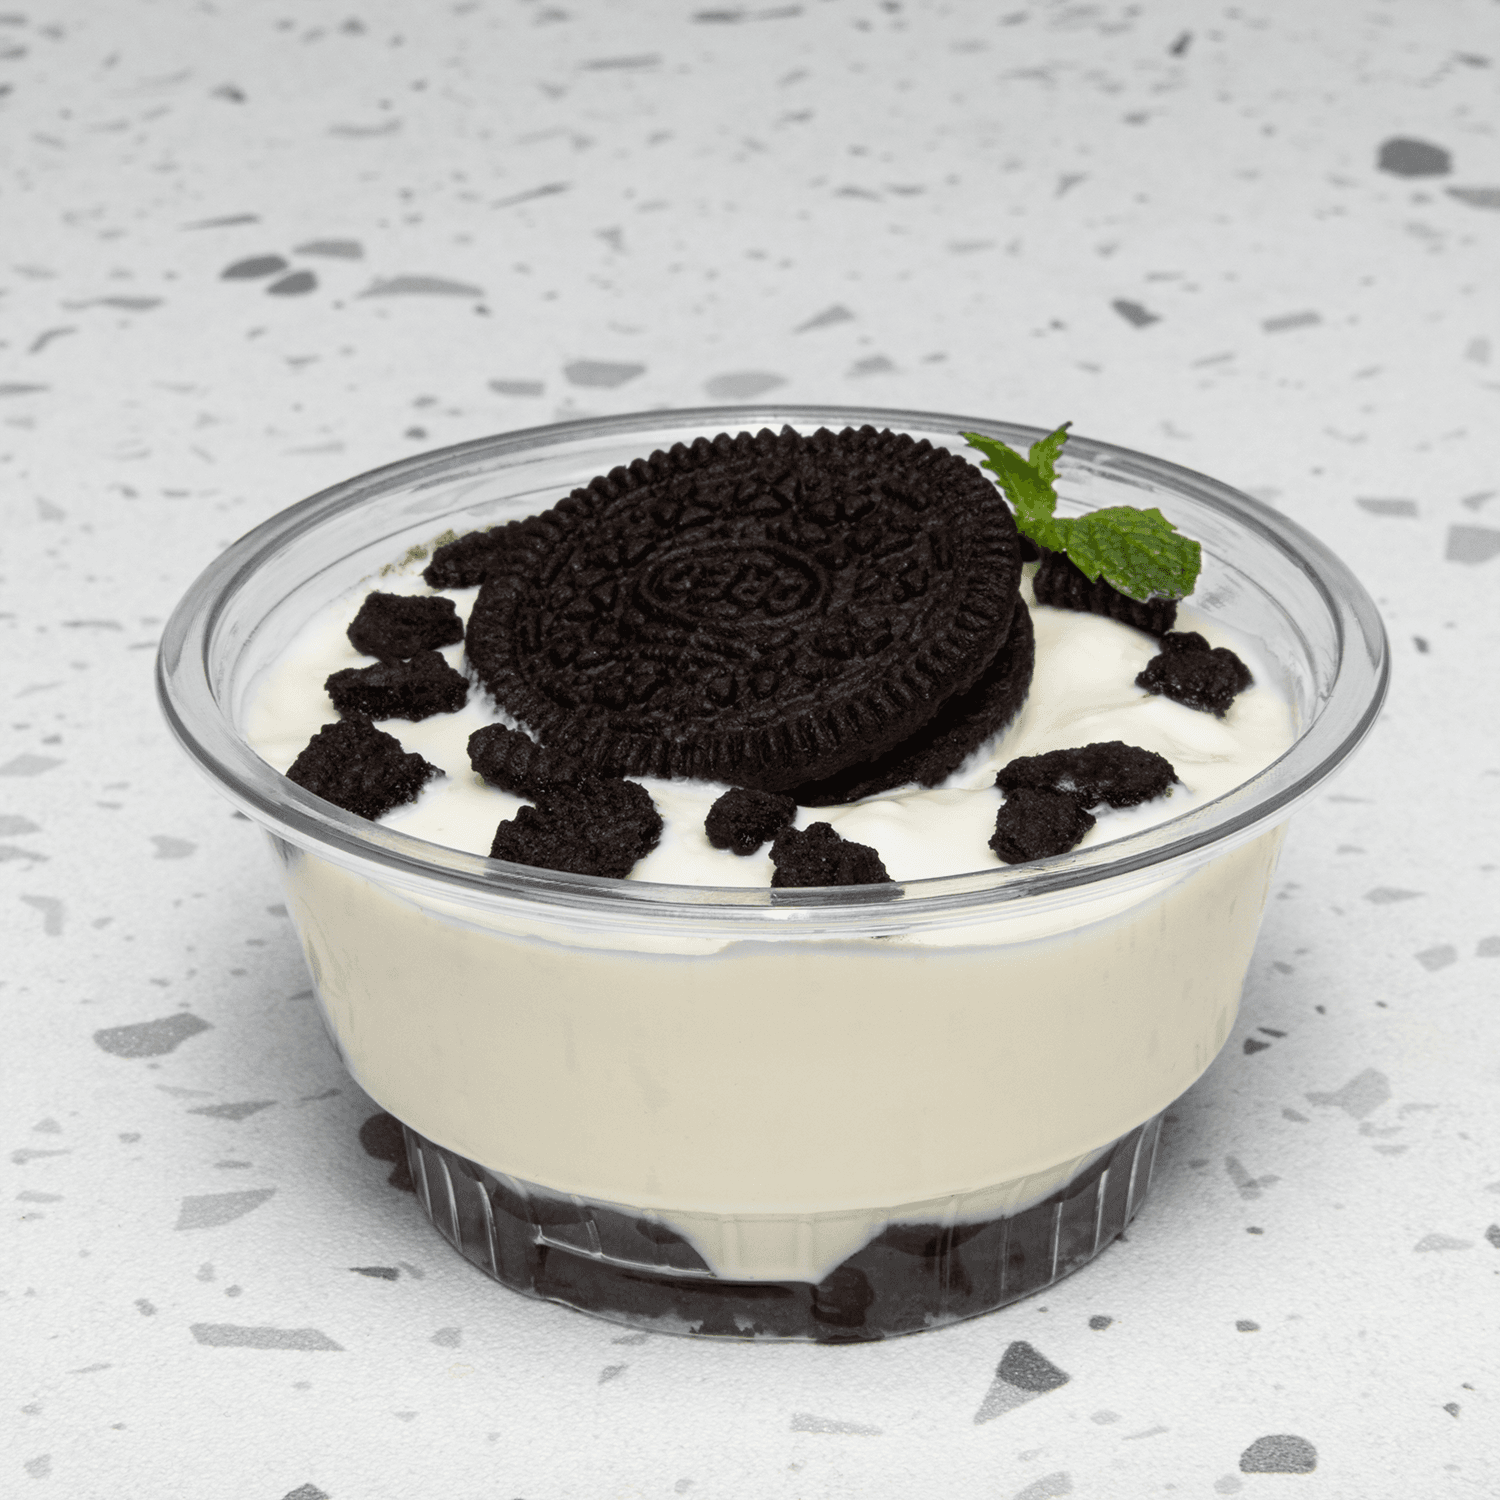 Clear Karat 5oz PET Plastic Dessert Cups with cookies and cream pudding